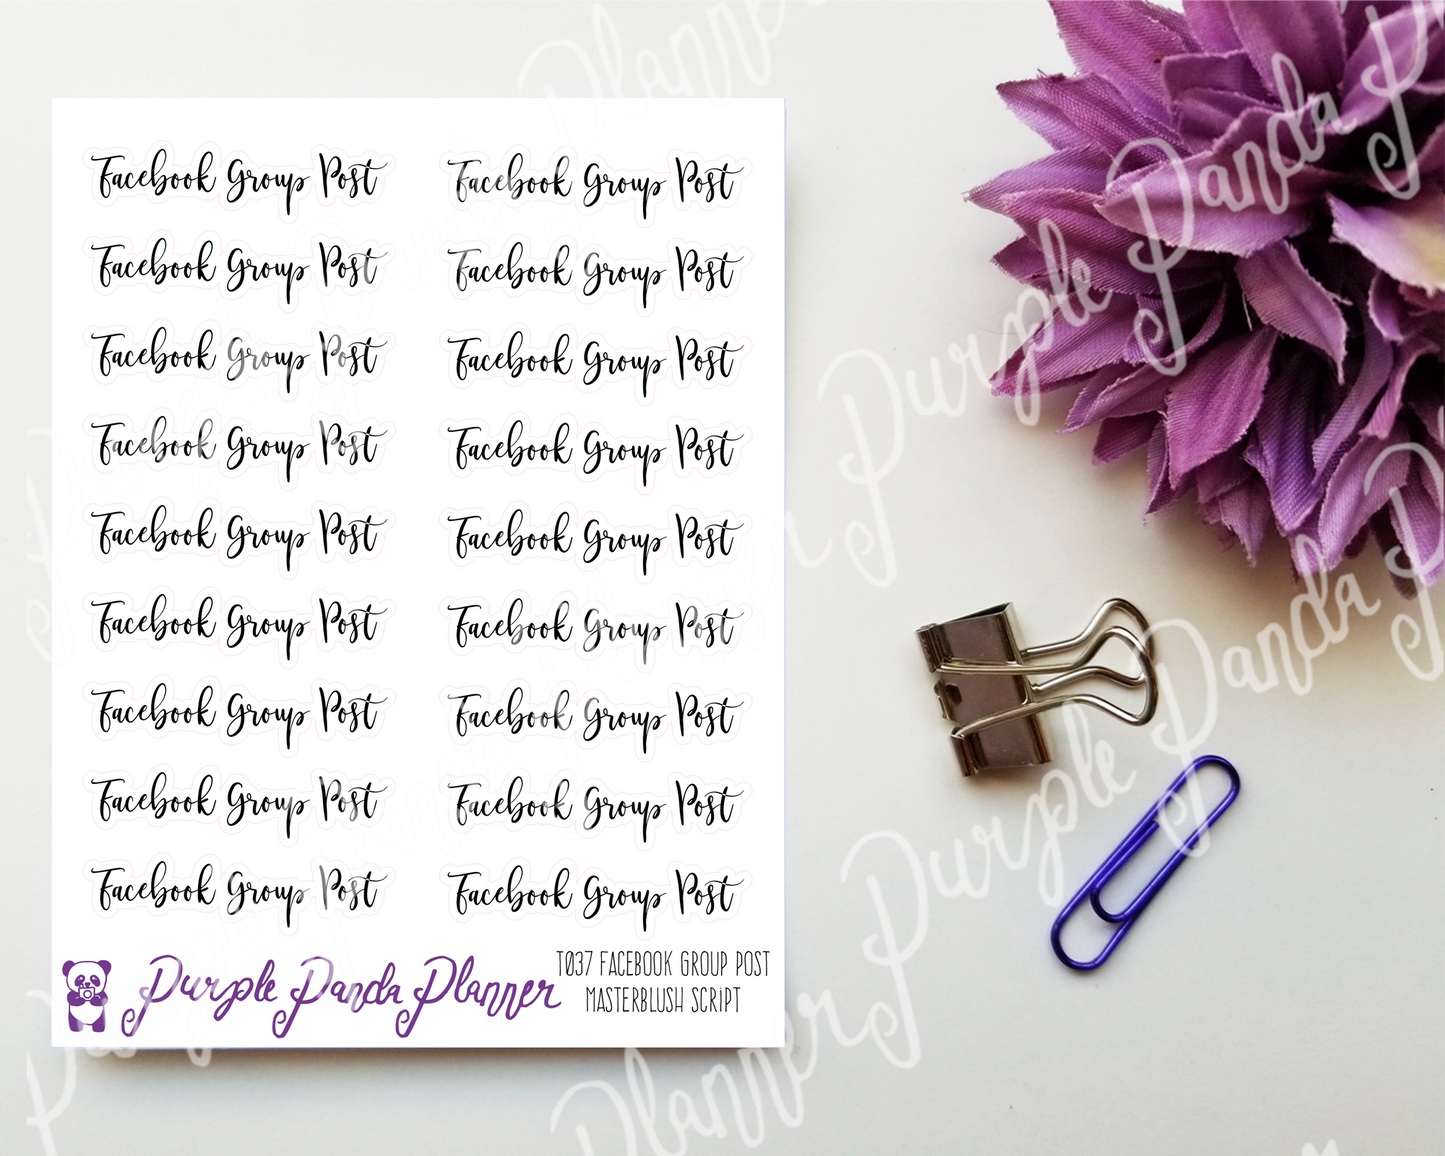 Facebook Group Post "Masterblush" Script Stickers |T037|